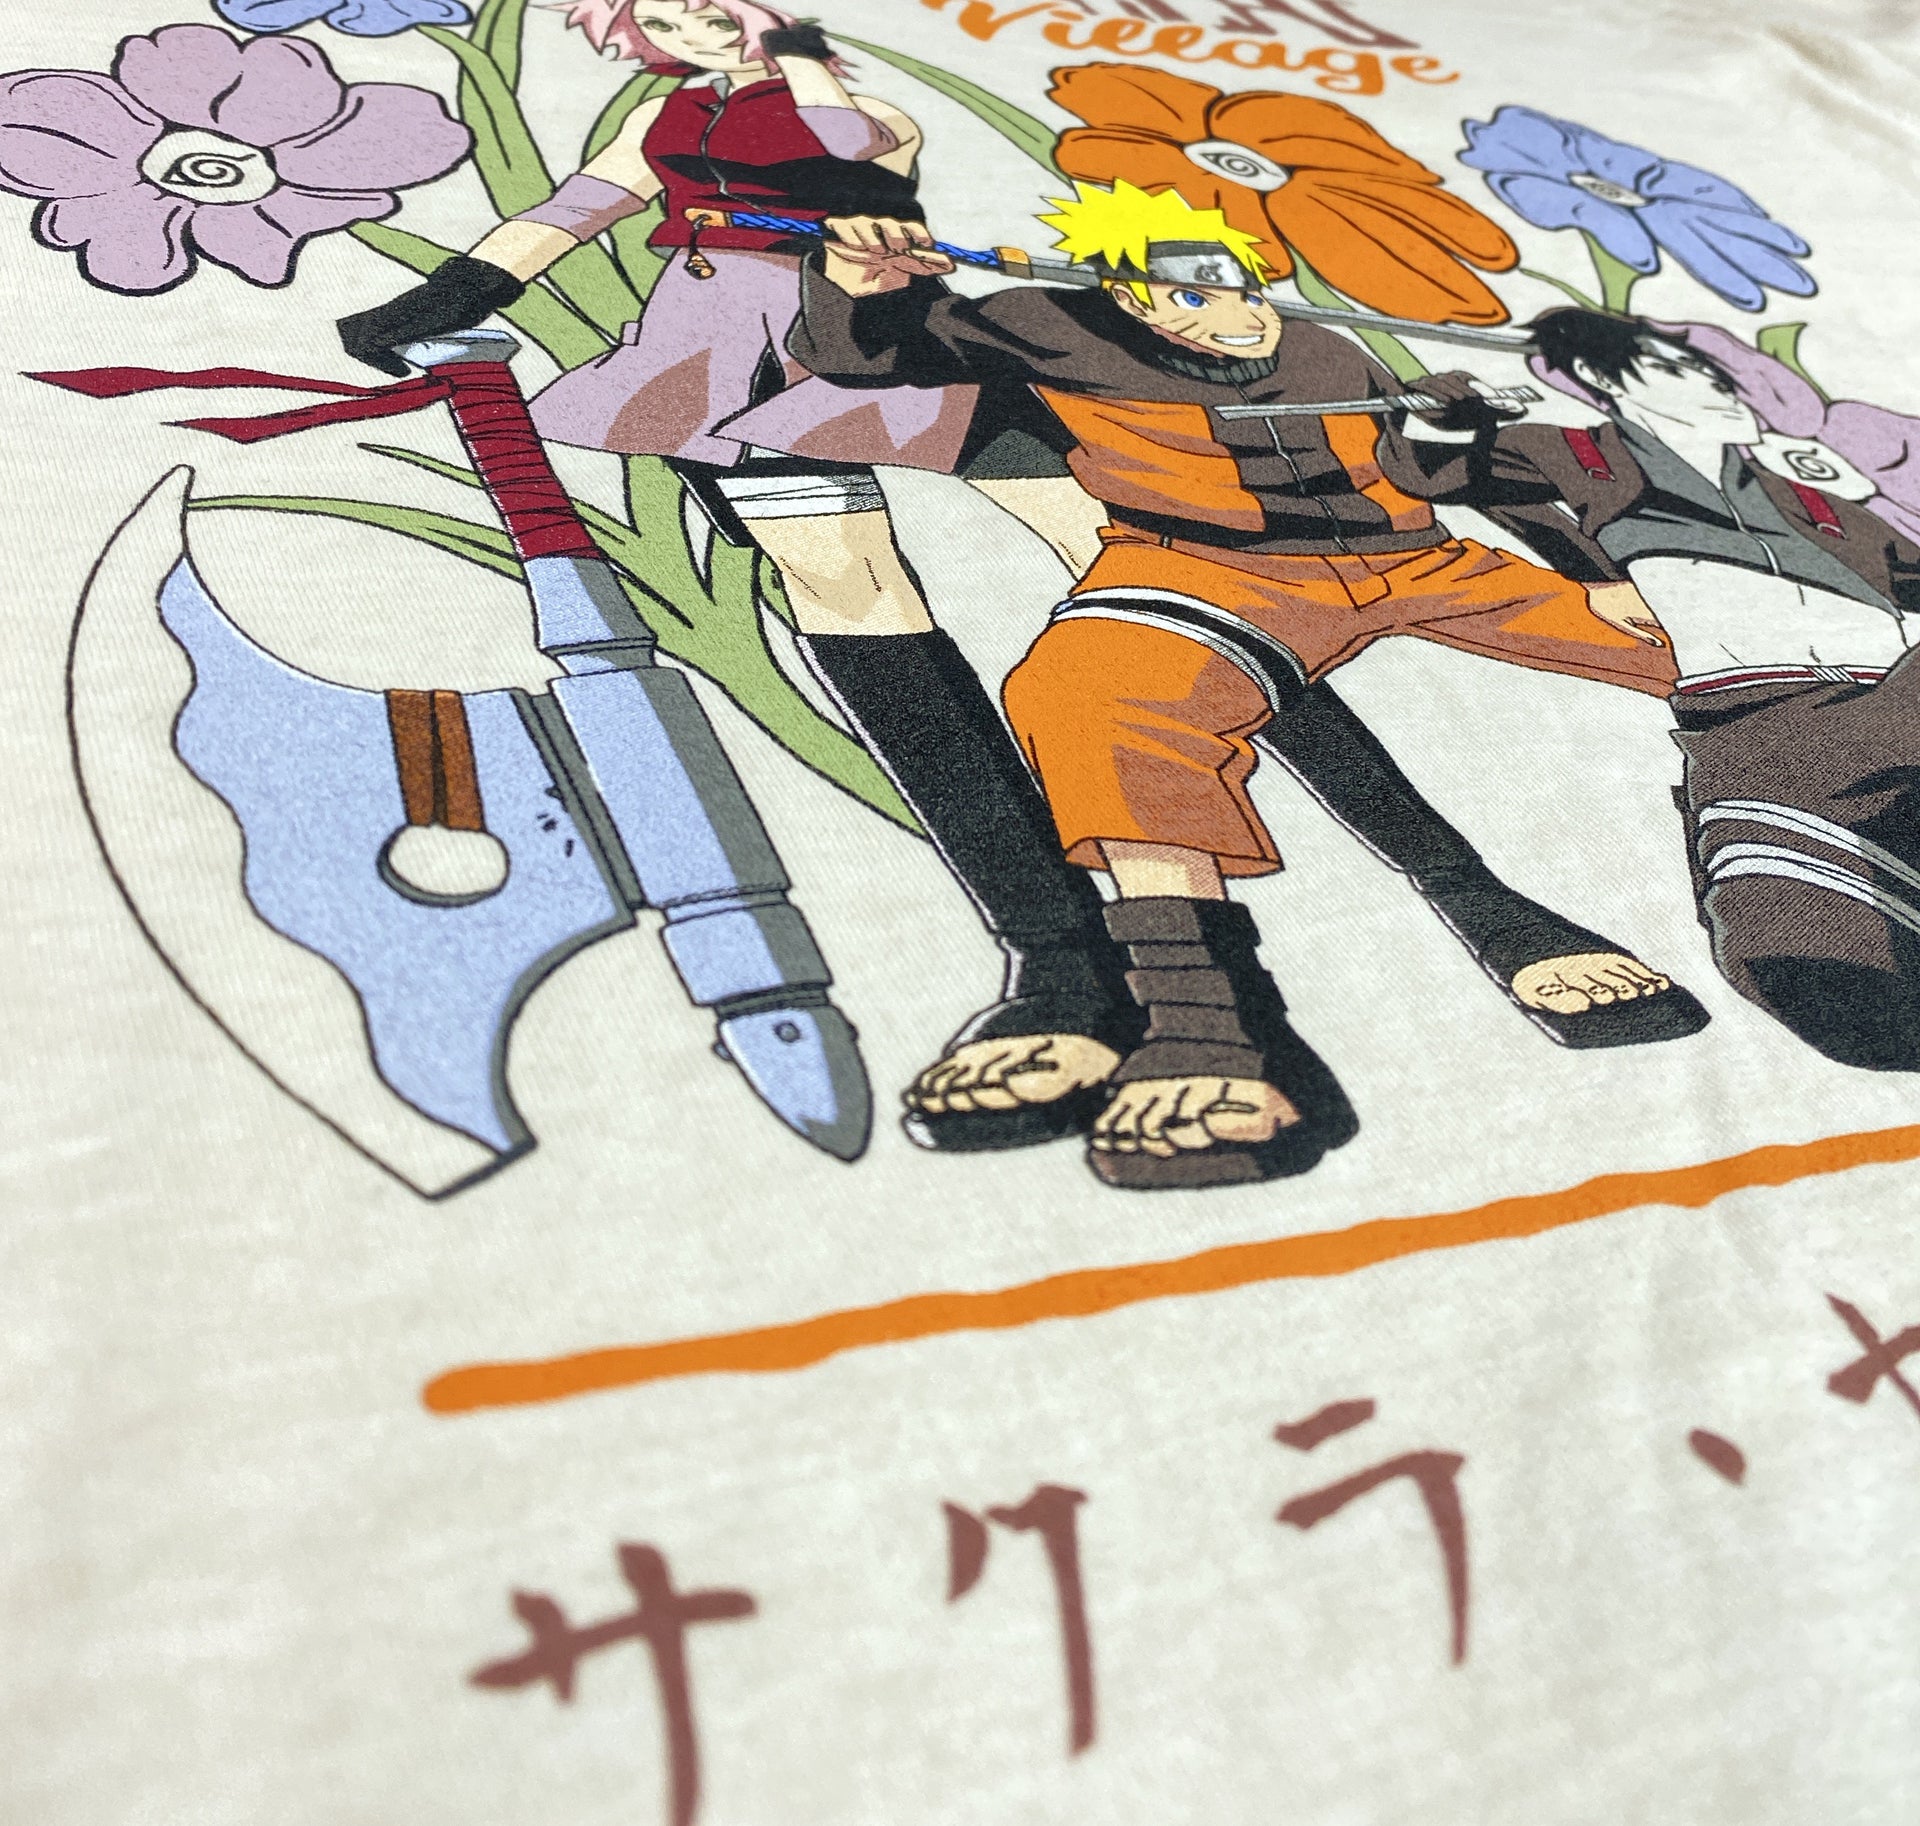 Naruto Shippuden - Village of the Hidden Leaf T-Shirt - Crunchyroll Exclusive! image count 1